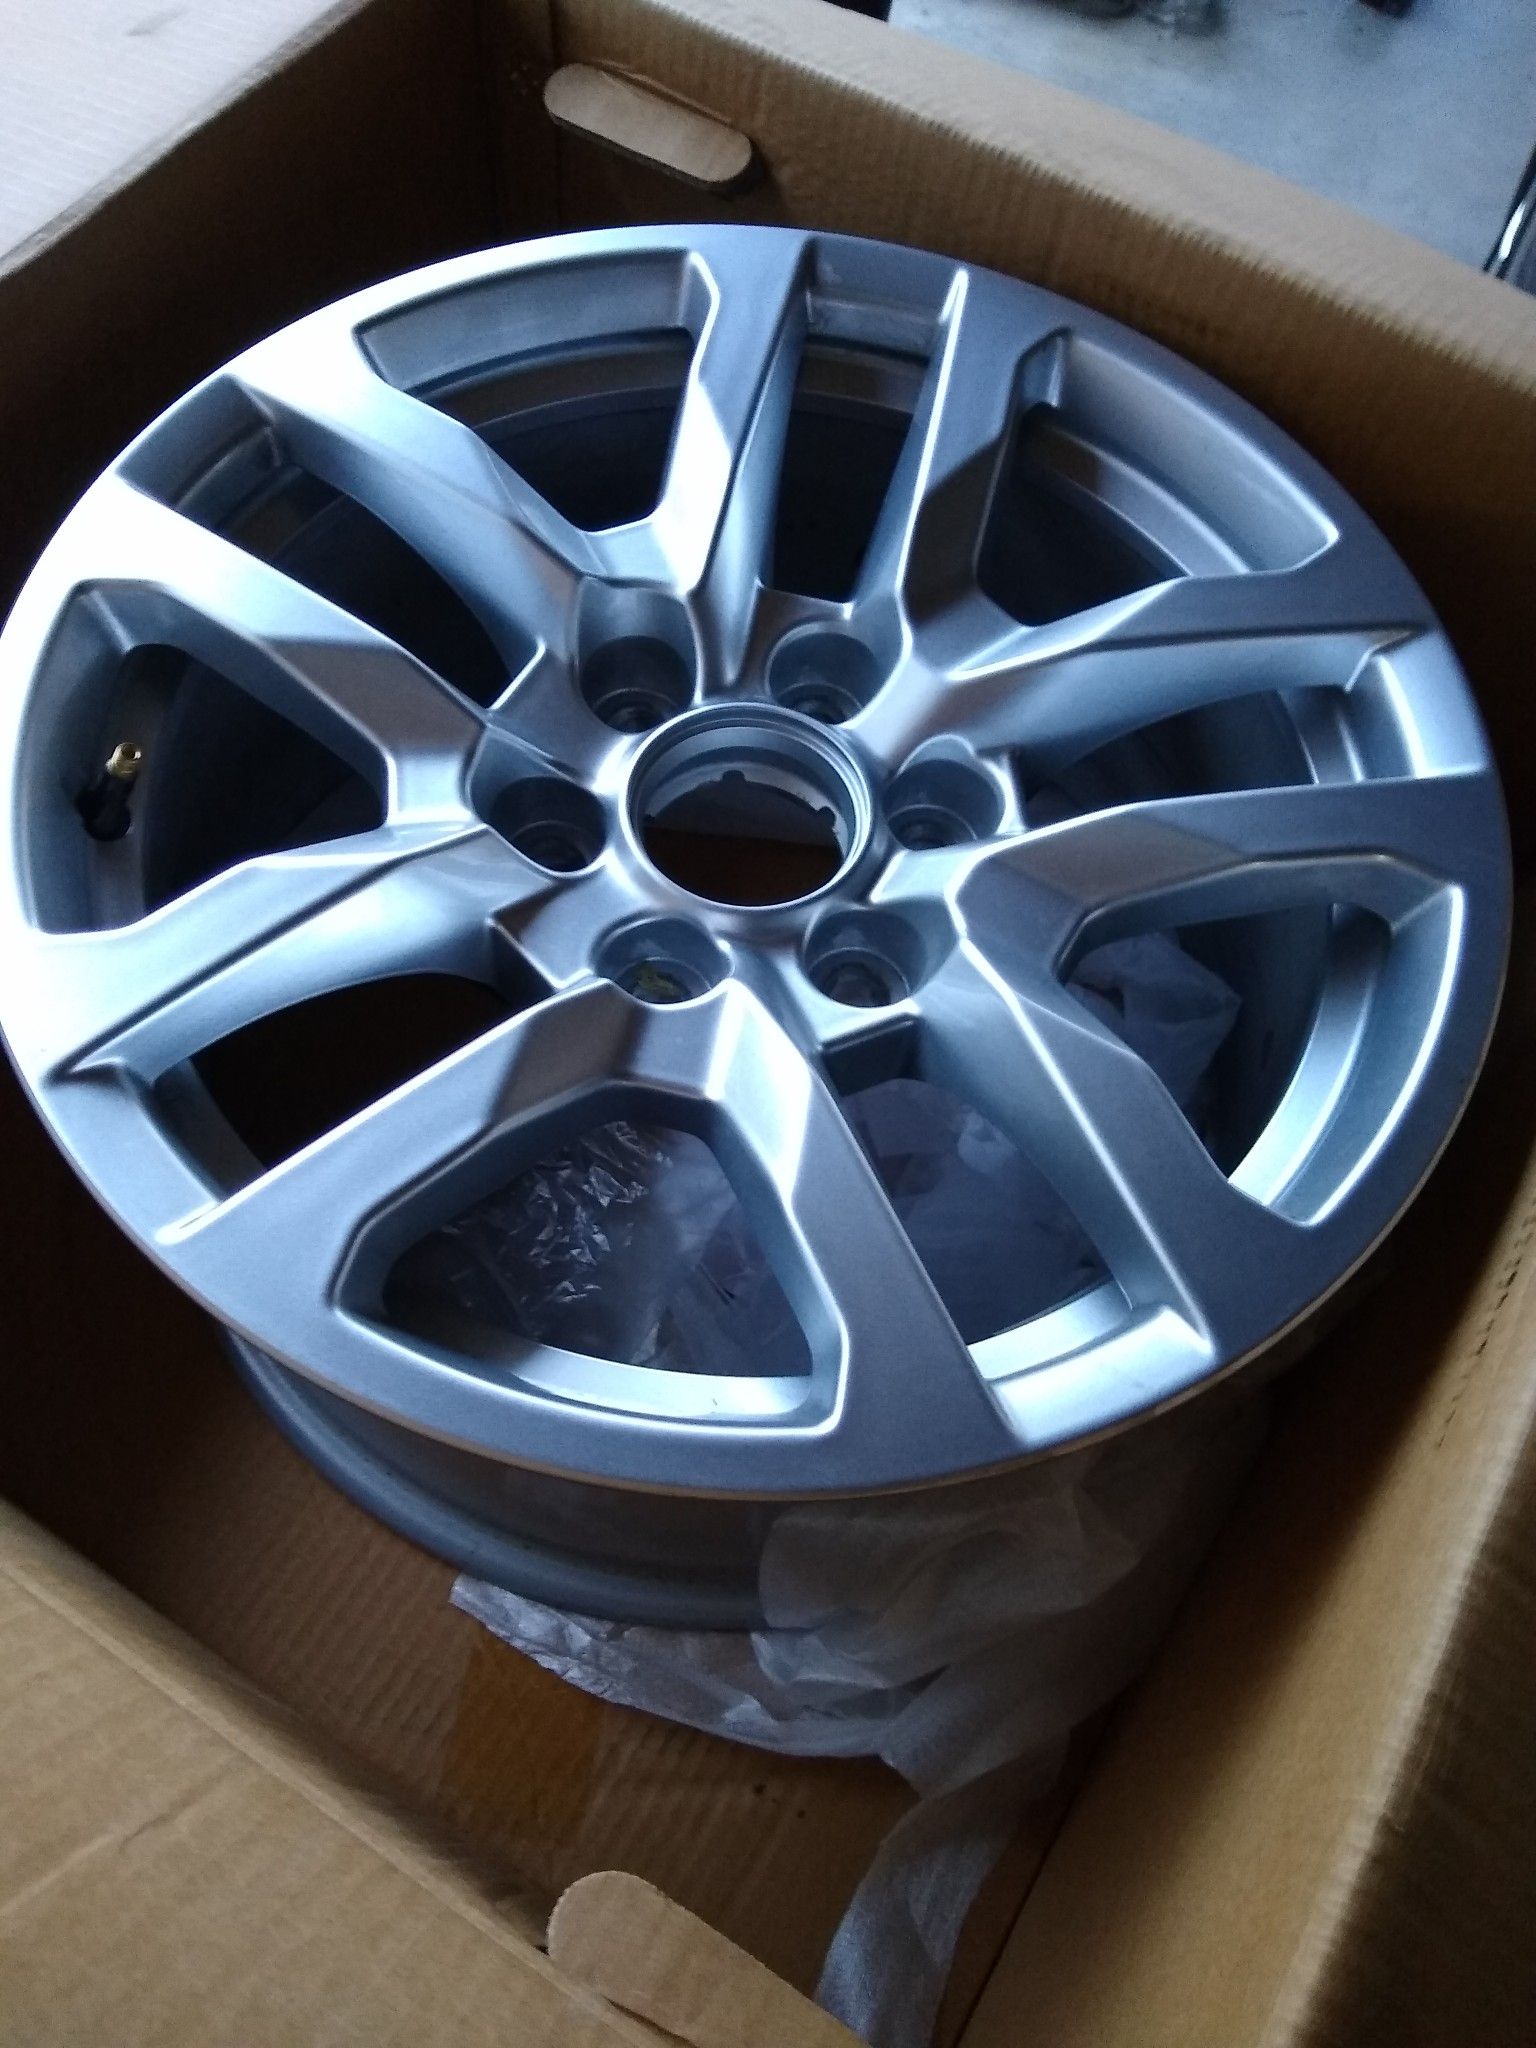 THESE ARE SWEET! 4 new original (OEM) GMC / Chevy 18 inch rims/wheels